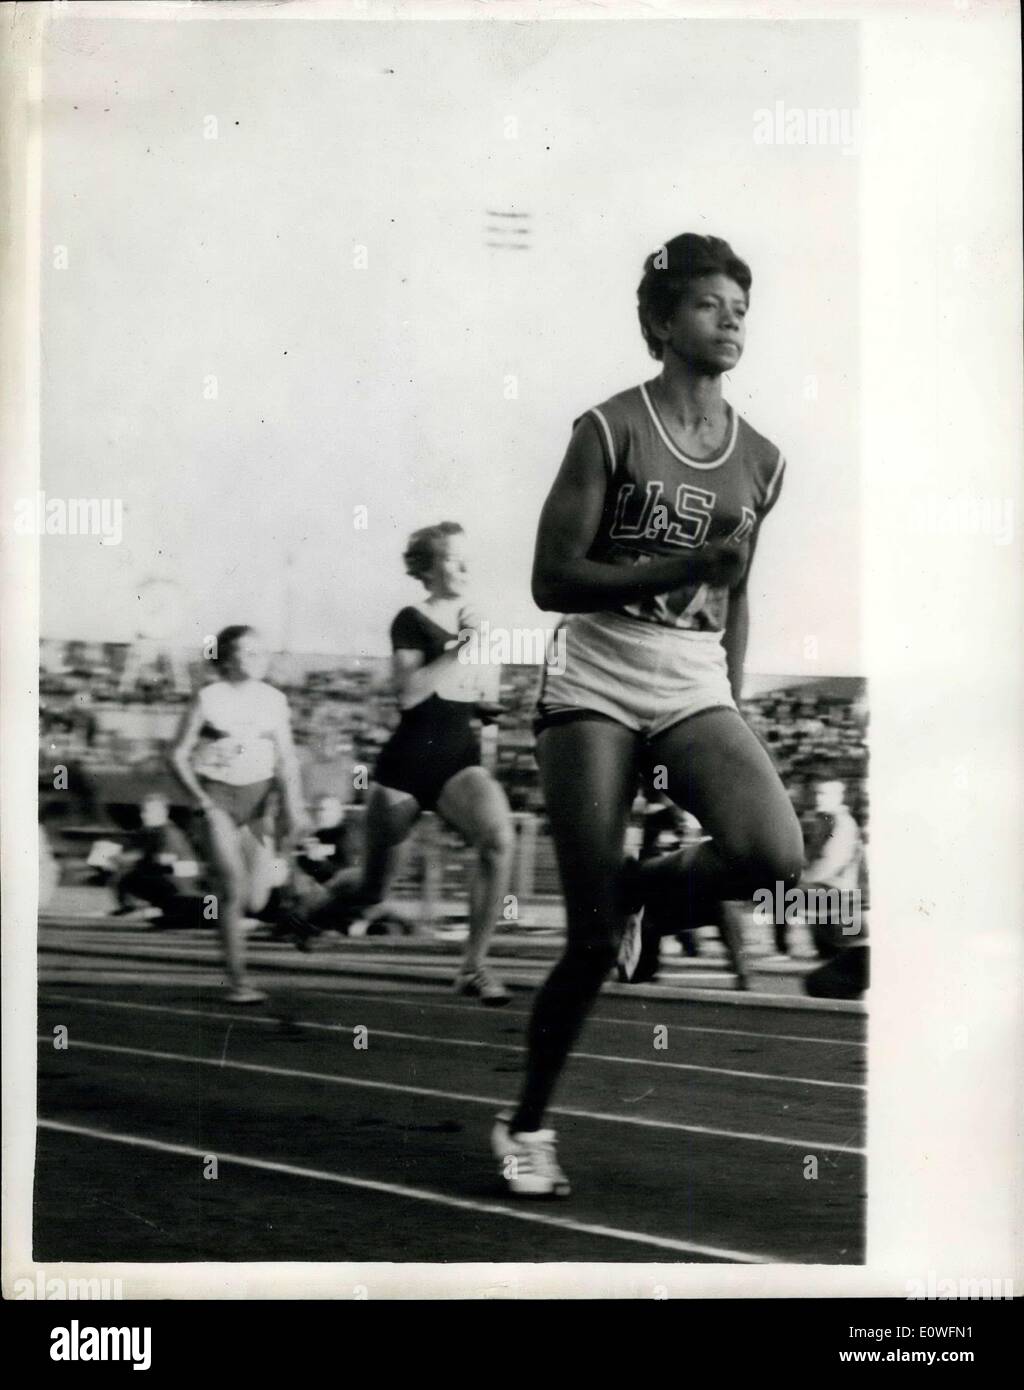 Aug. 31, 1962 - The Gazelle - on visit to Oslo: Known throughout the sporting world as The Gazelle - Wilma Rudolph the sensation American and Olympic athletic champion received a great ovation when she ran on the Bislet Track in Oslo as part of her Scandinavian tour. Photo shows Wilma Rudolph is soon in the lead in the sprint event on the Bislet Track - Oslo. Stock Photo